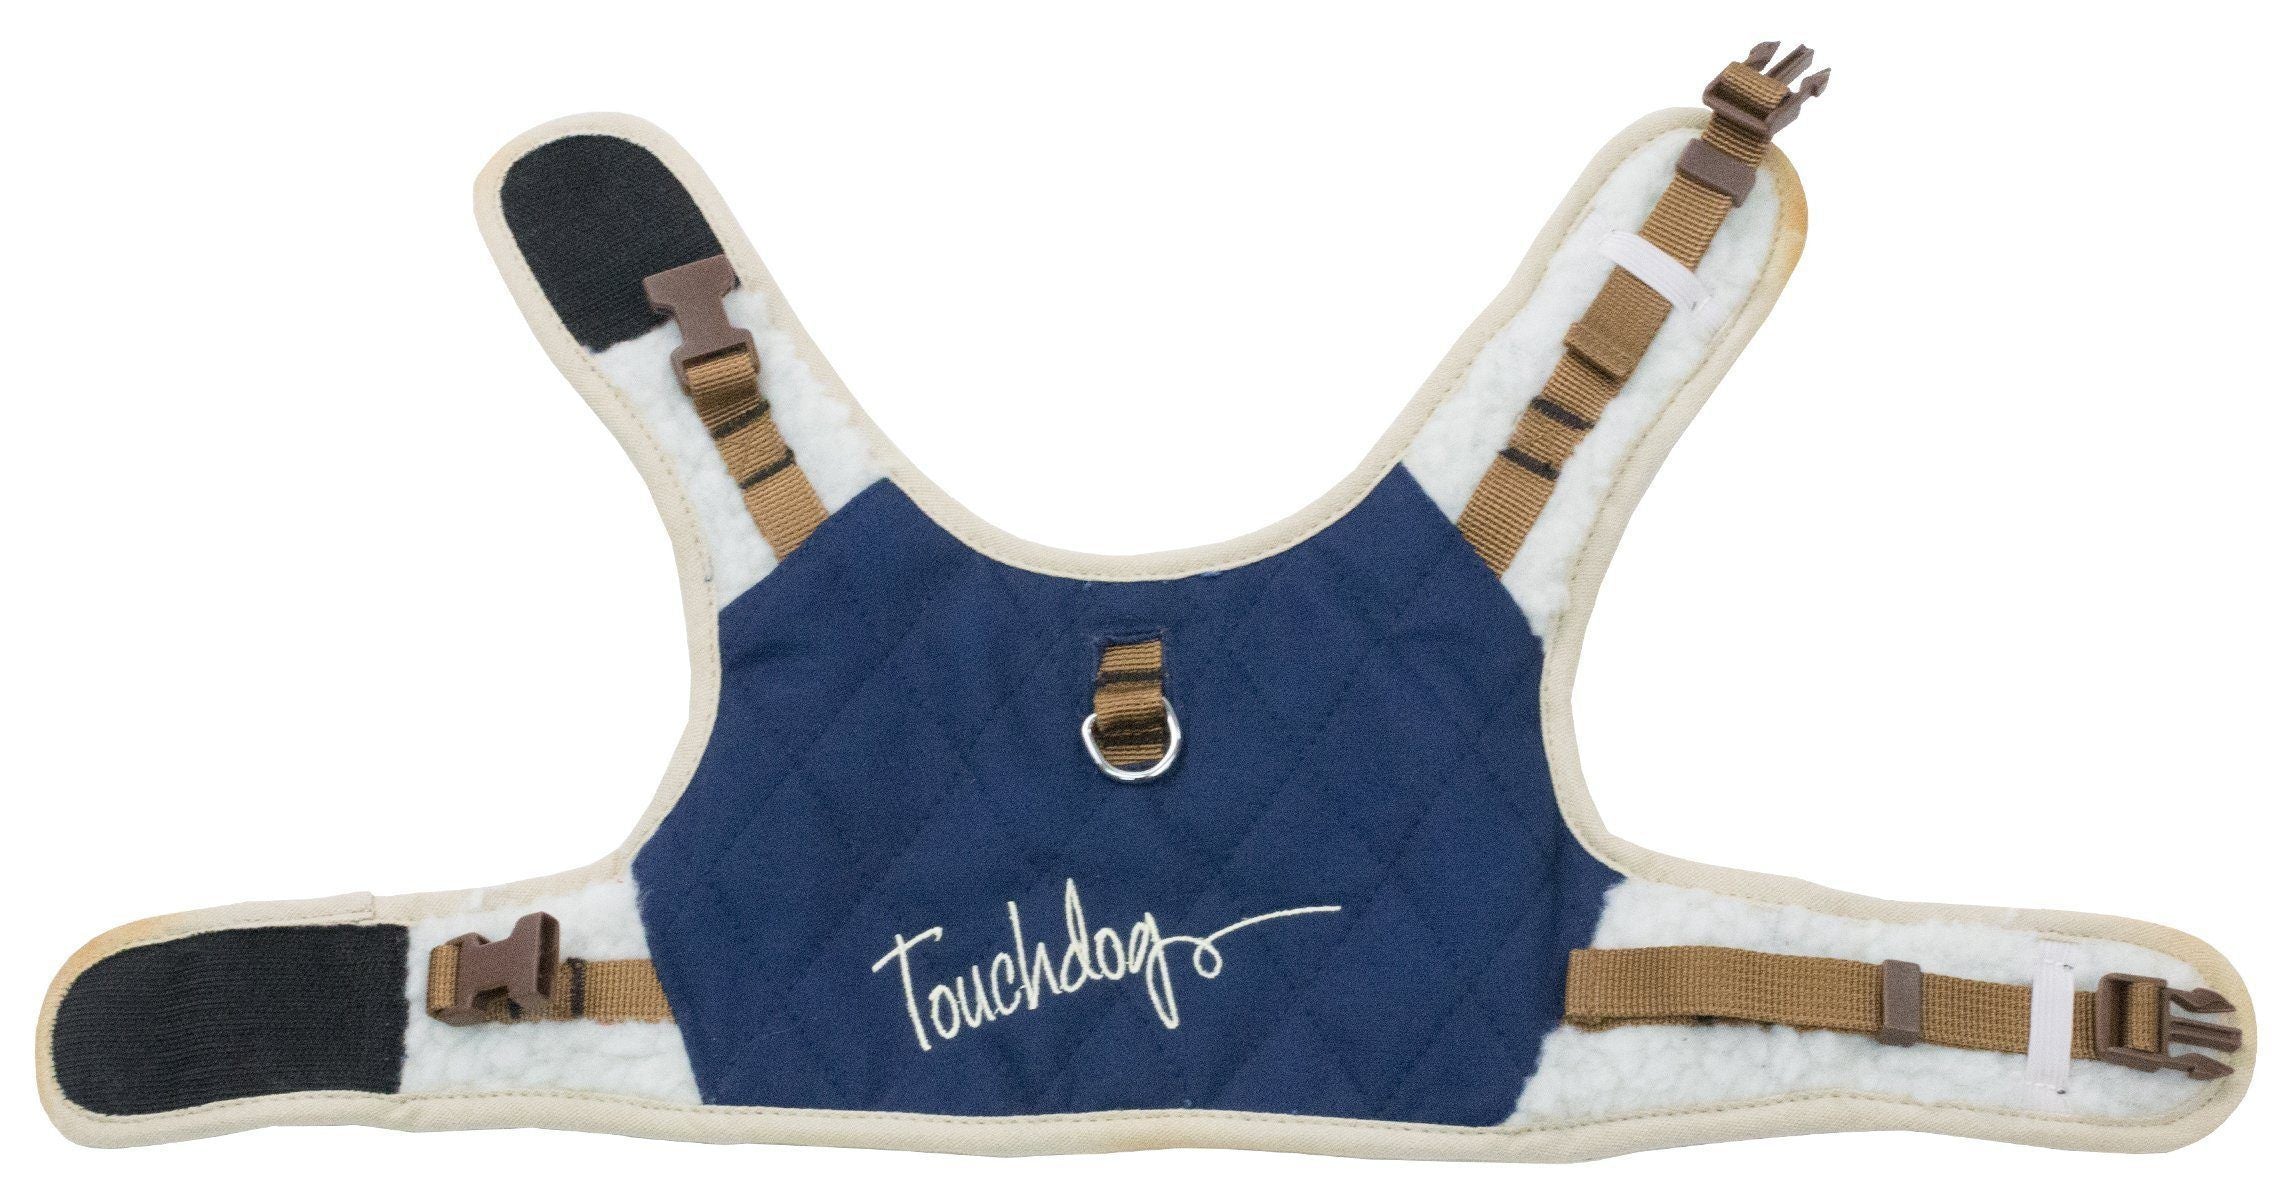 Touchdog ® 'Tough-Boutique' 2-in-1 Adjustable Fashion Dog Harness and Leash  